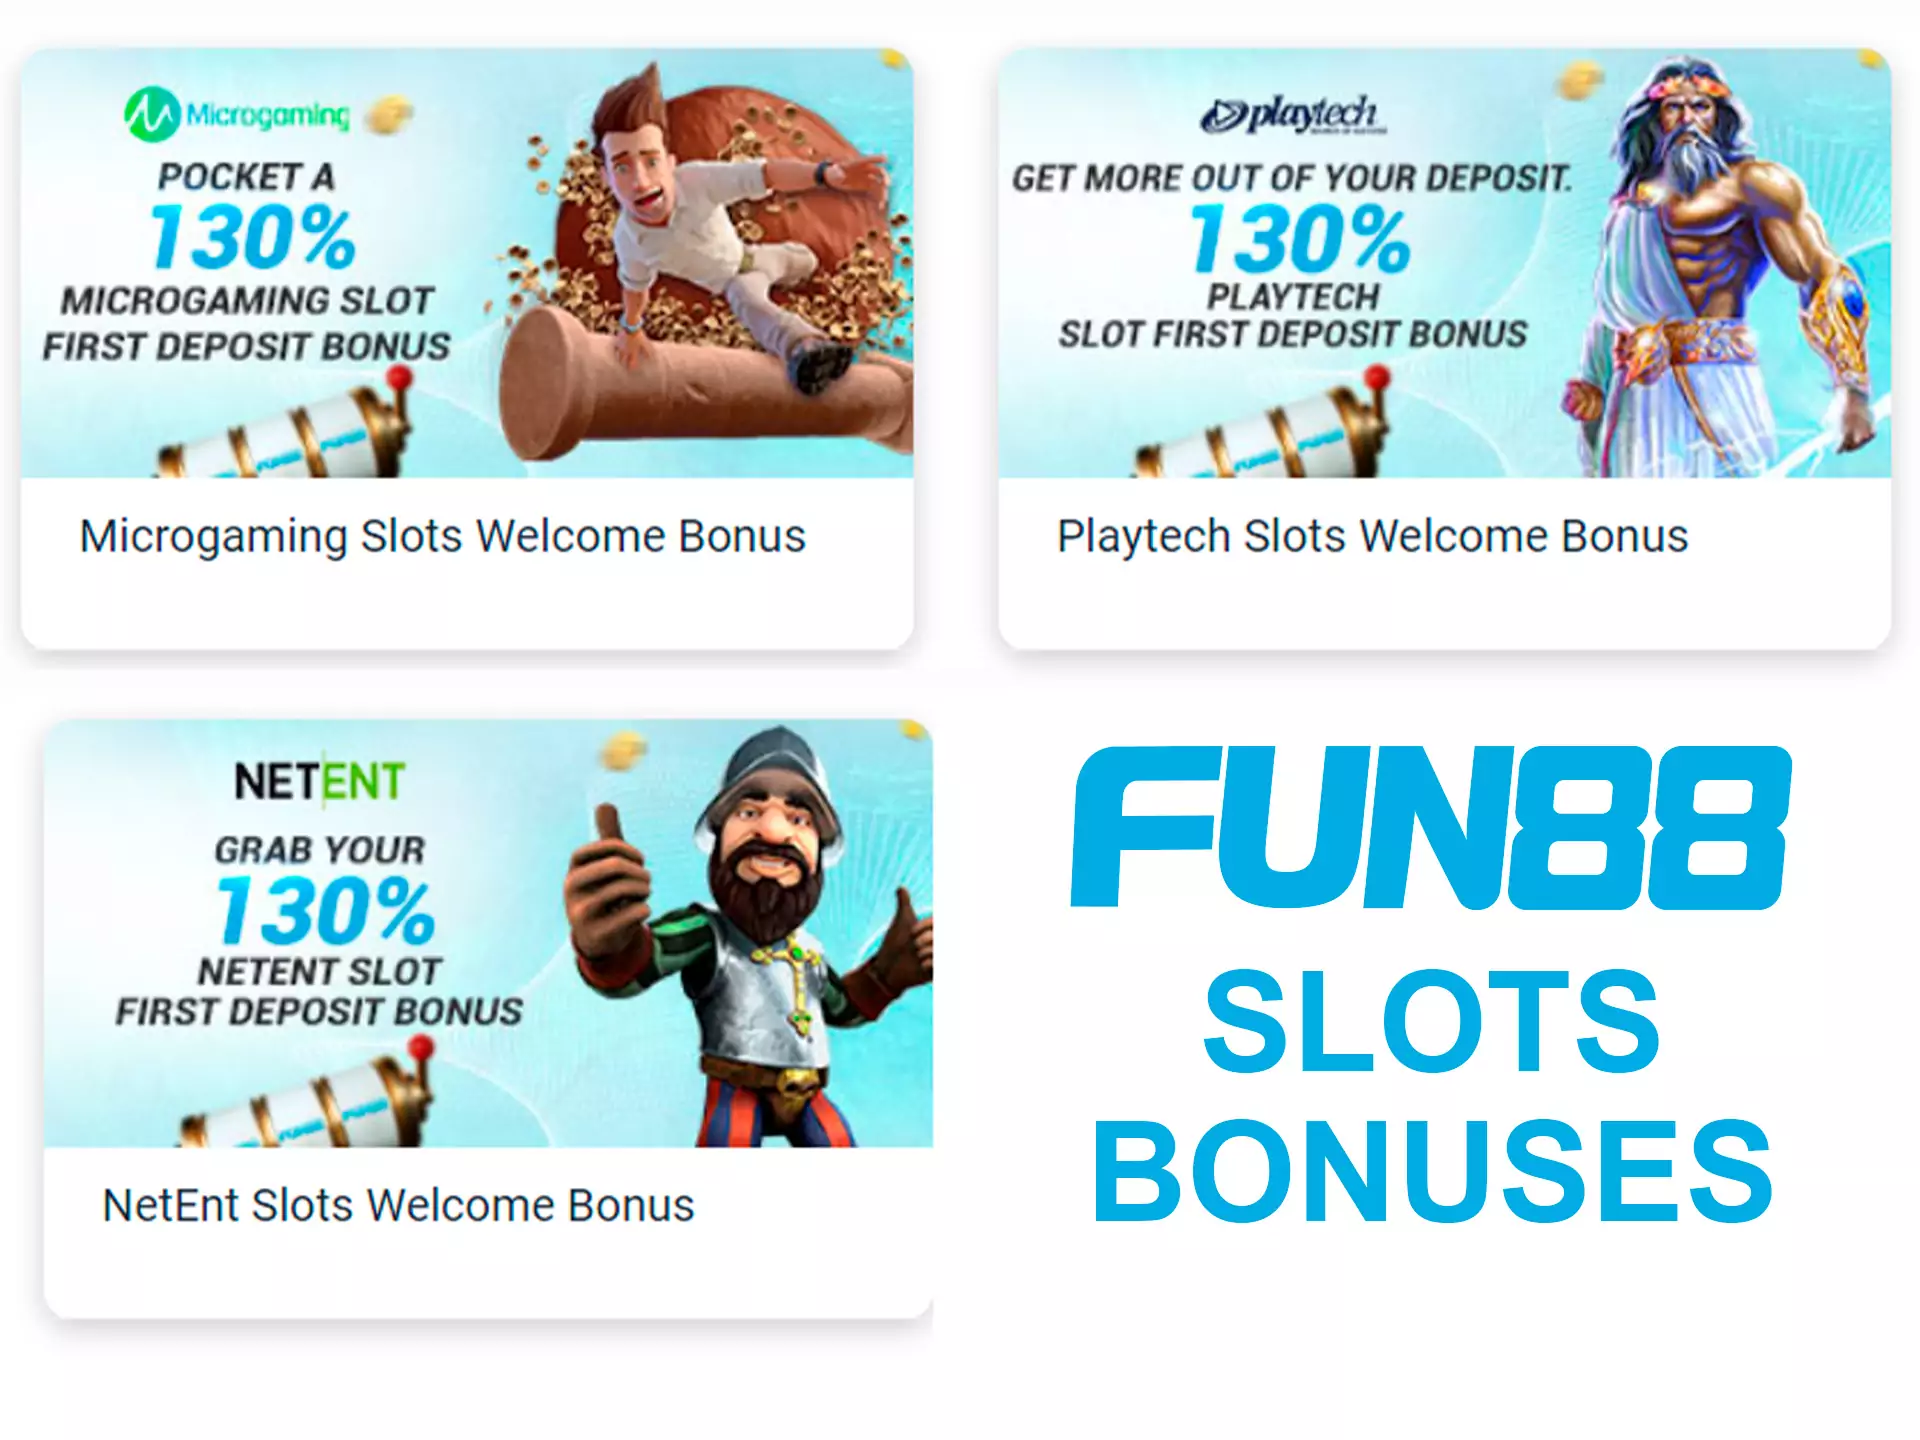 You can spend your first deposit bonus on slots form NetEnt, Microgaming, Playtect, etc.